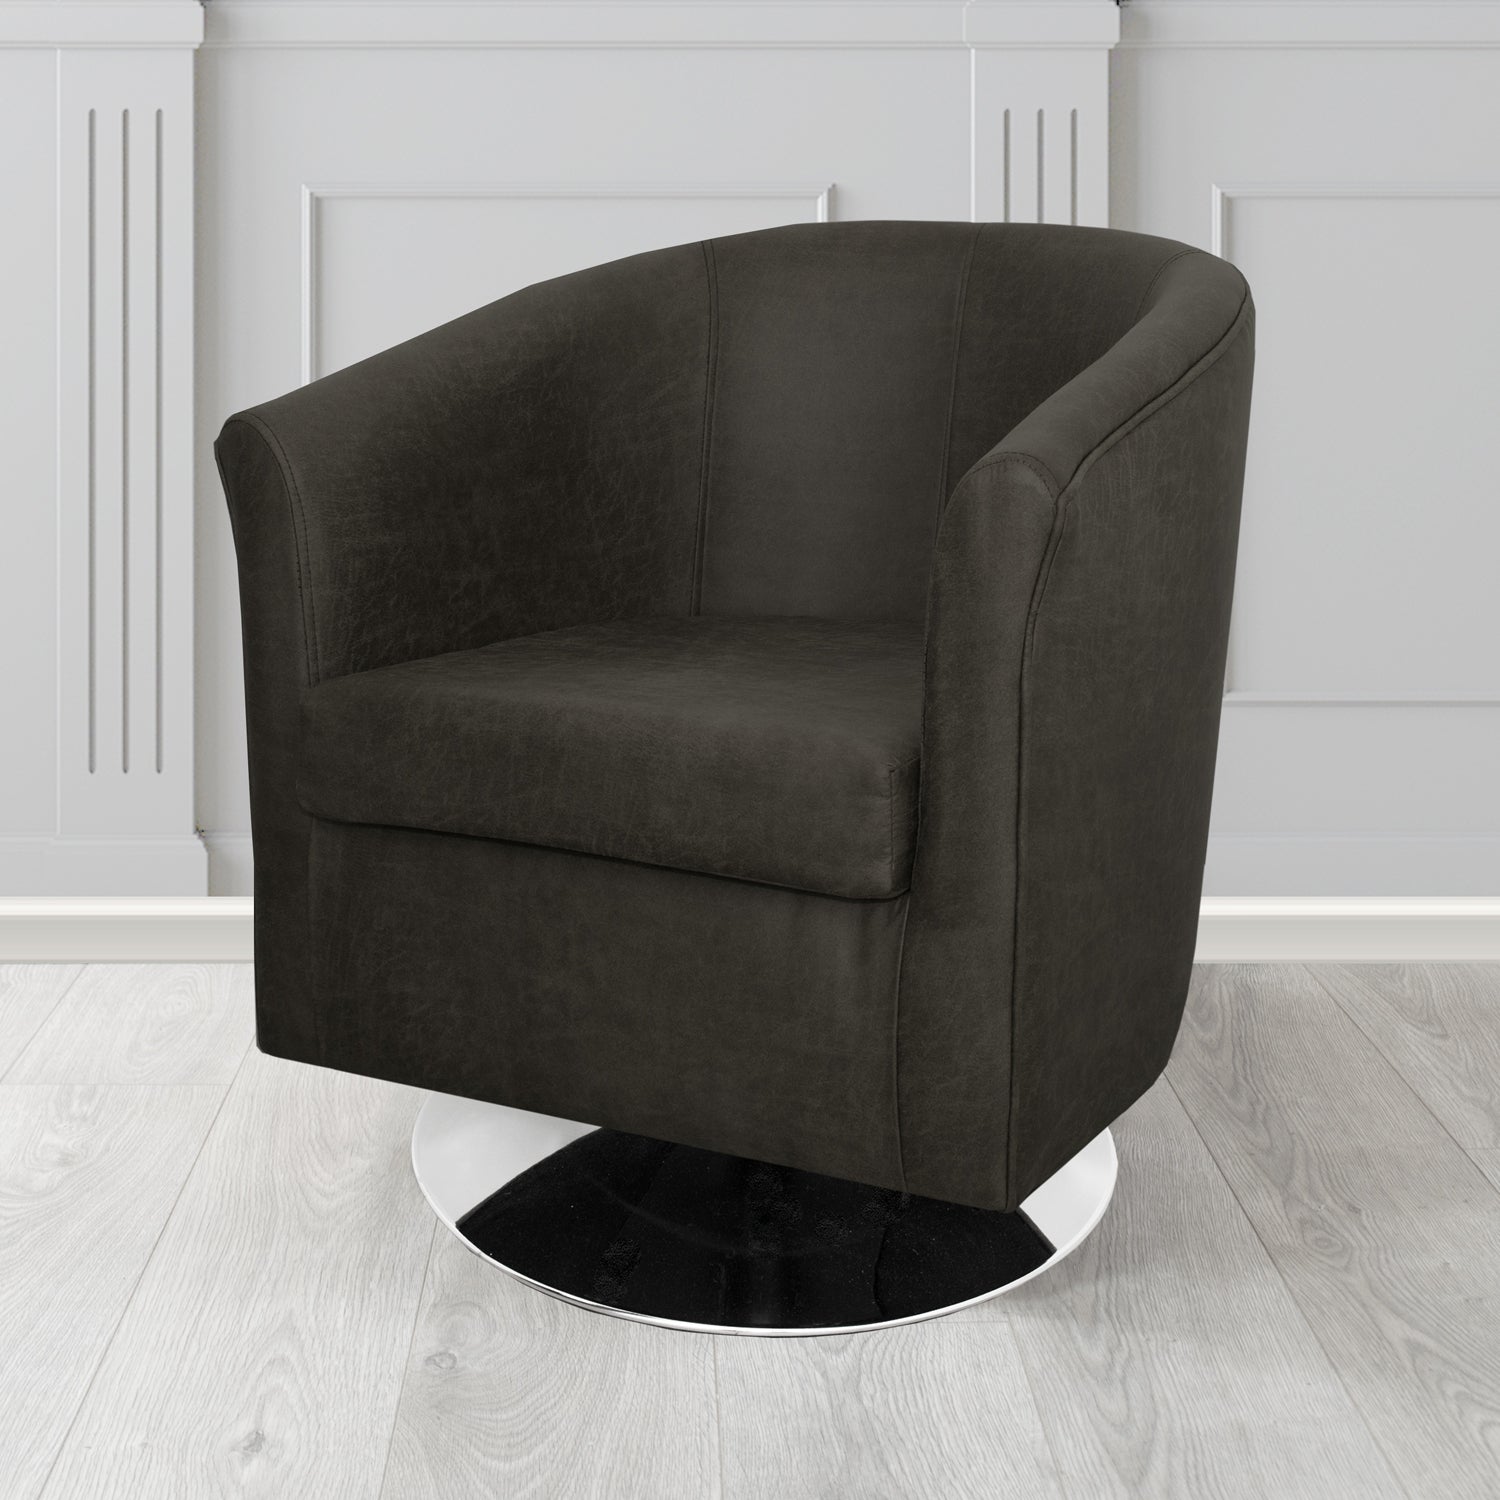 Tuscany Swivel Tub Chair in Nevada Black Faux Leather - The Tub Chair Shop